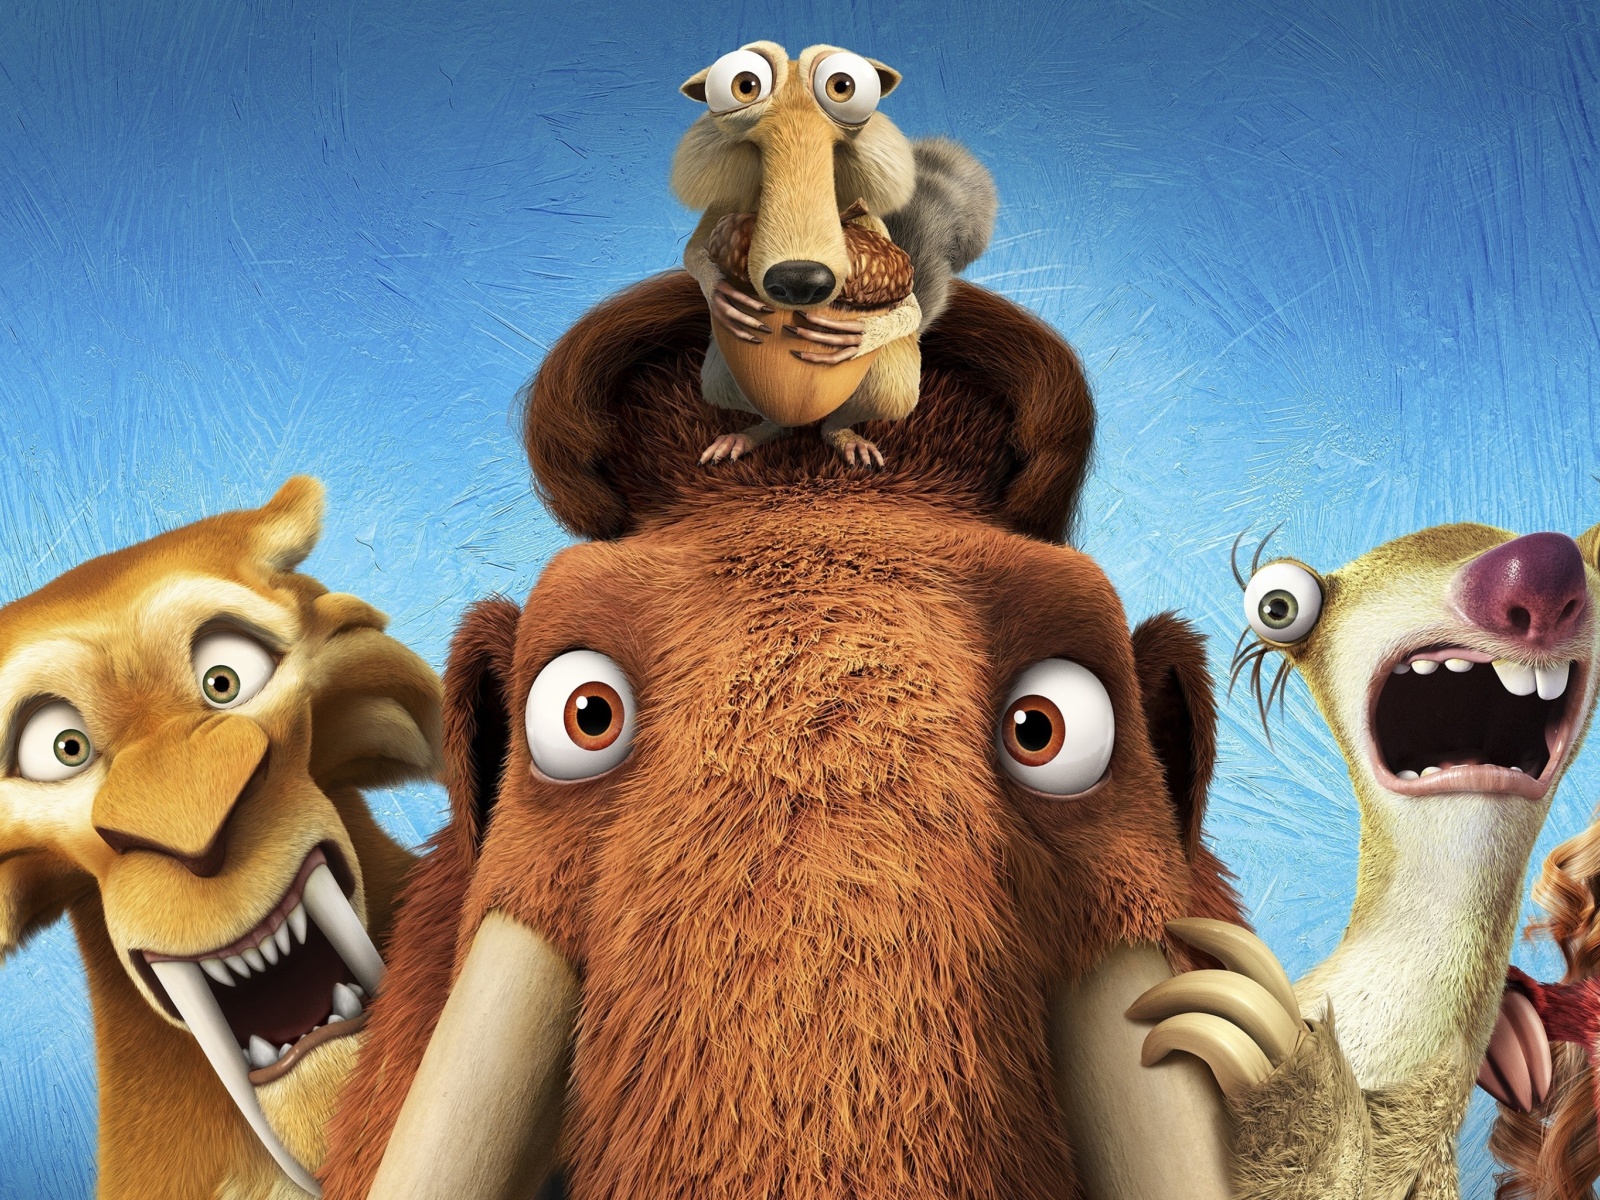 Ice Age 5 Collision Course with Diego, Manny, Scrat, Sid, Mammoths wallpaper 1600x1200